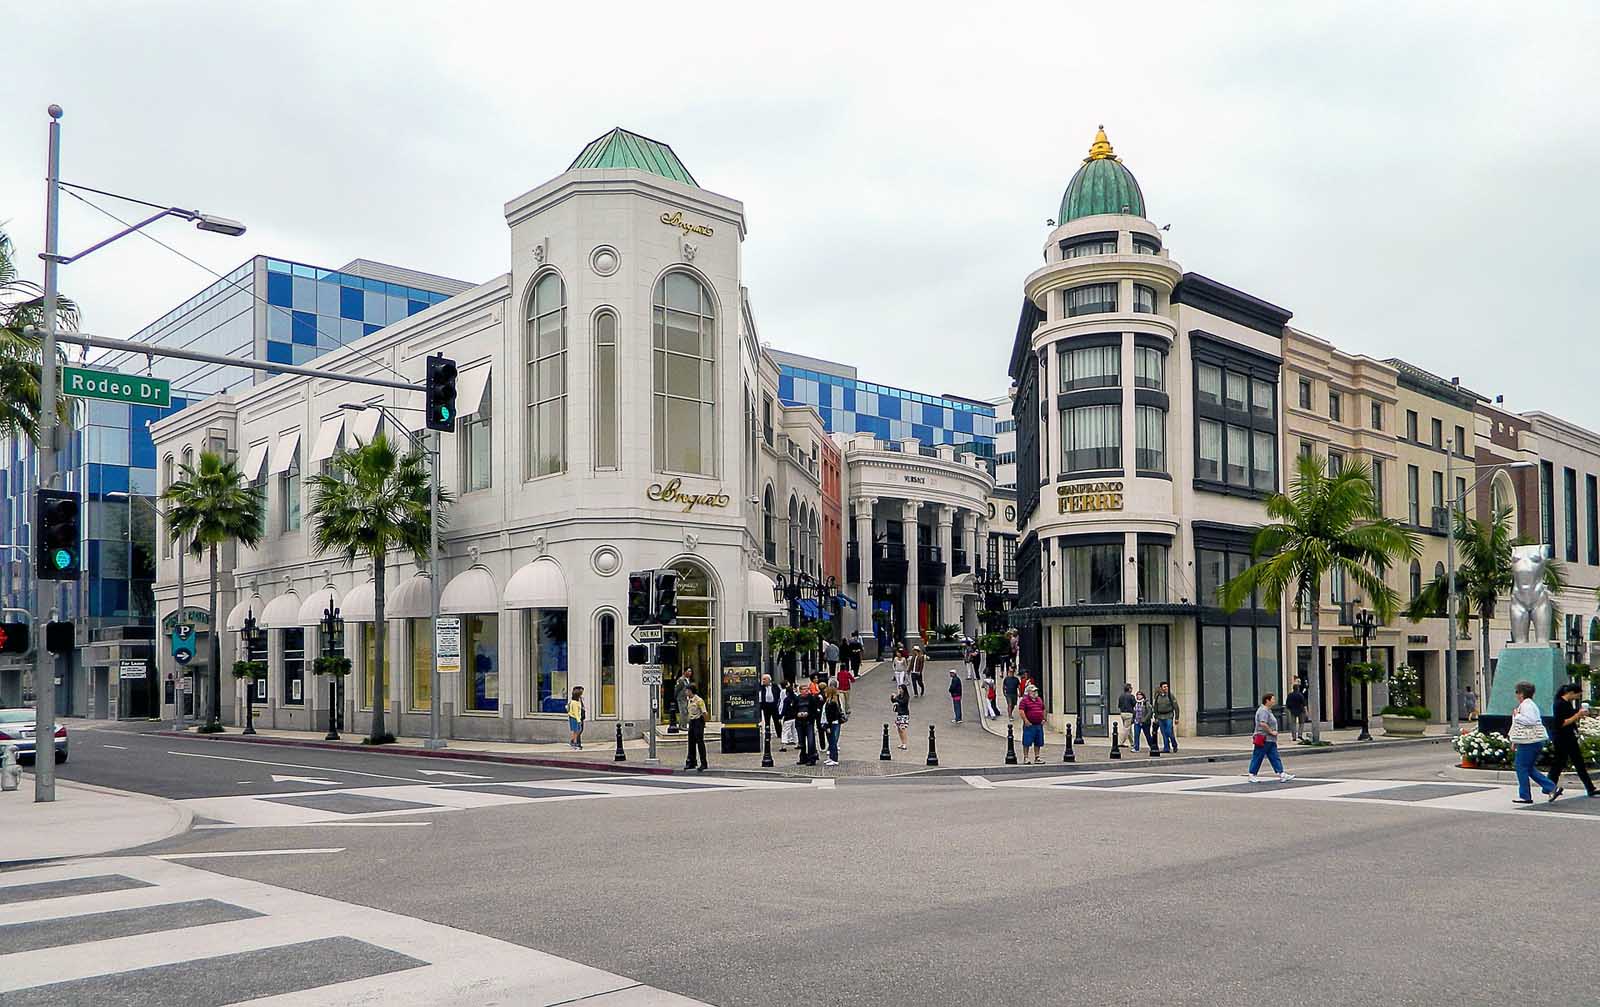 Shopping in Los Angeles on Rodeo Drive